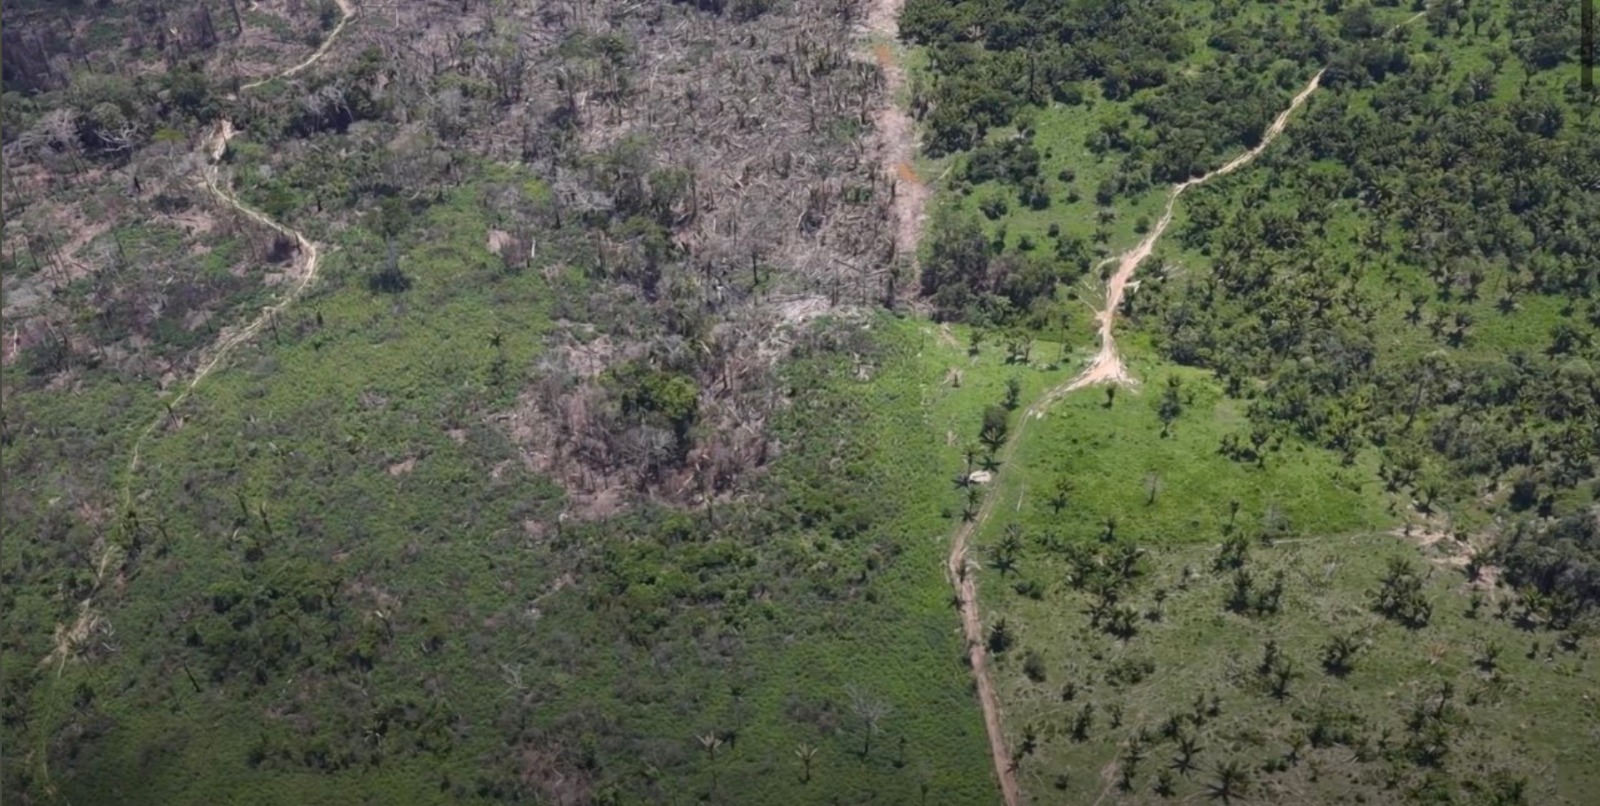 A land ilegally used by a land grabber in the Amazon